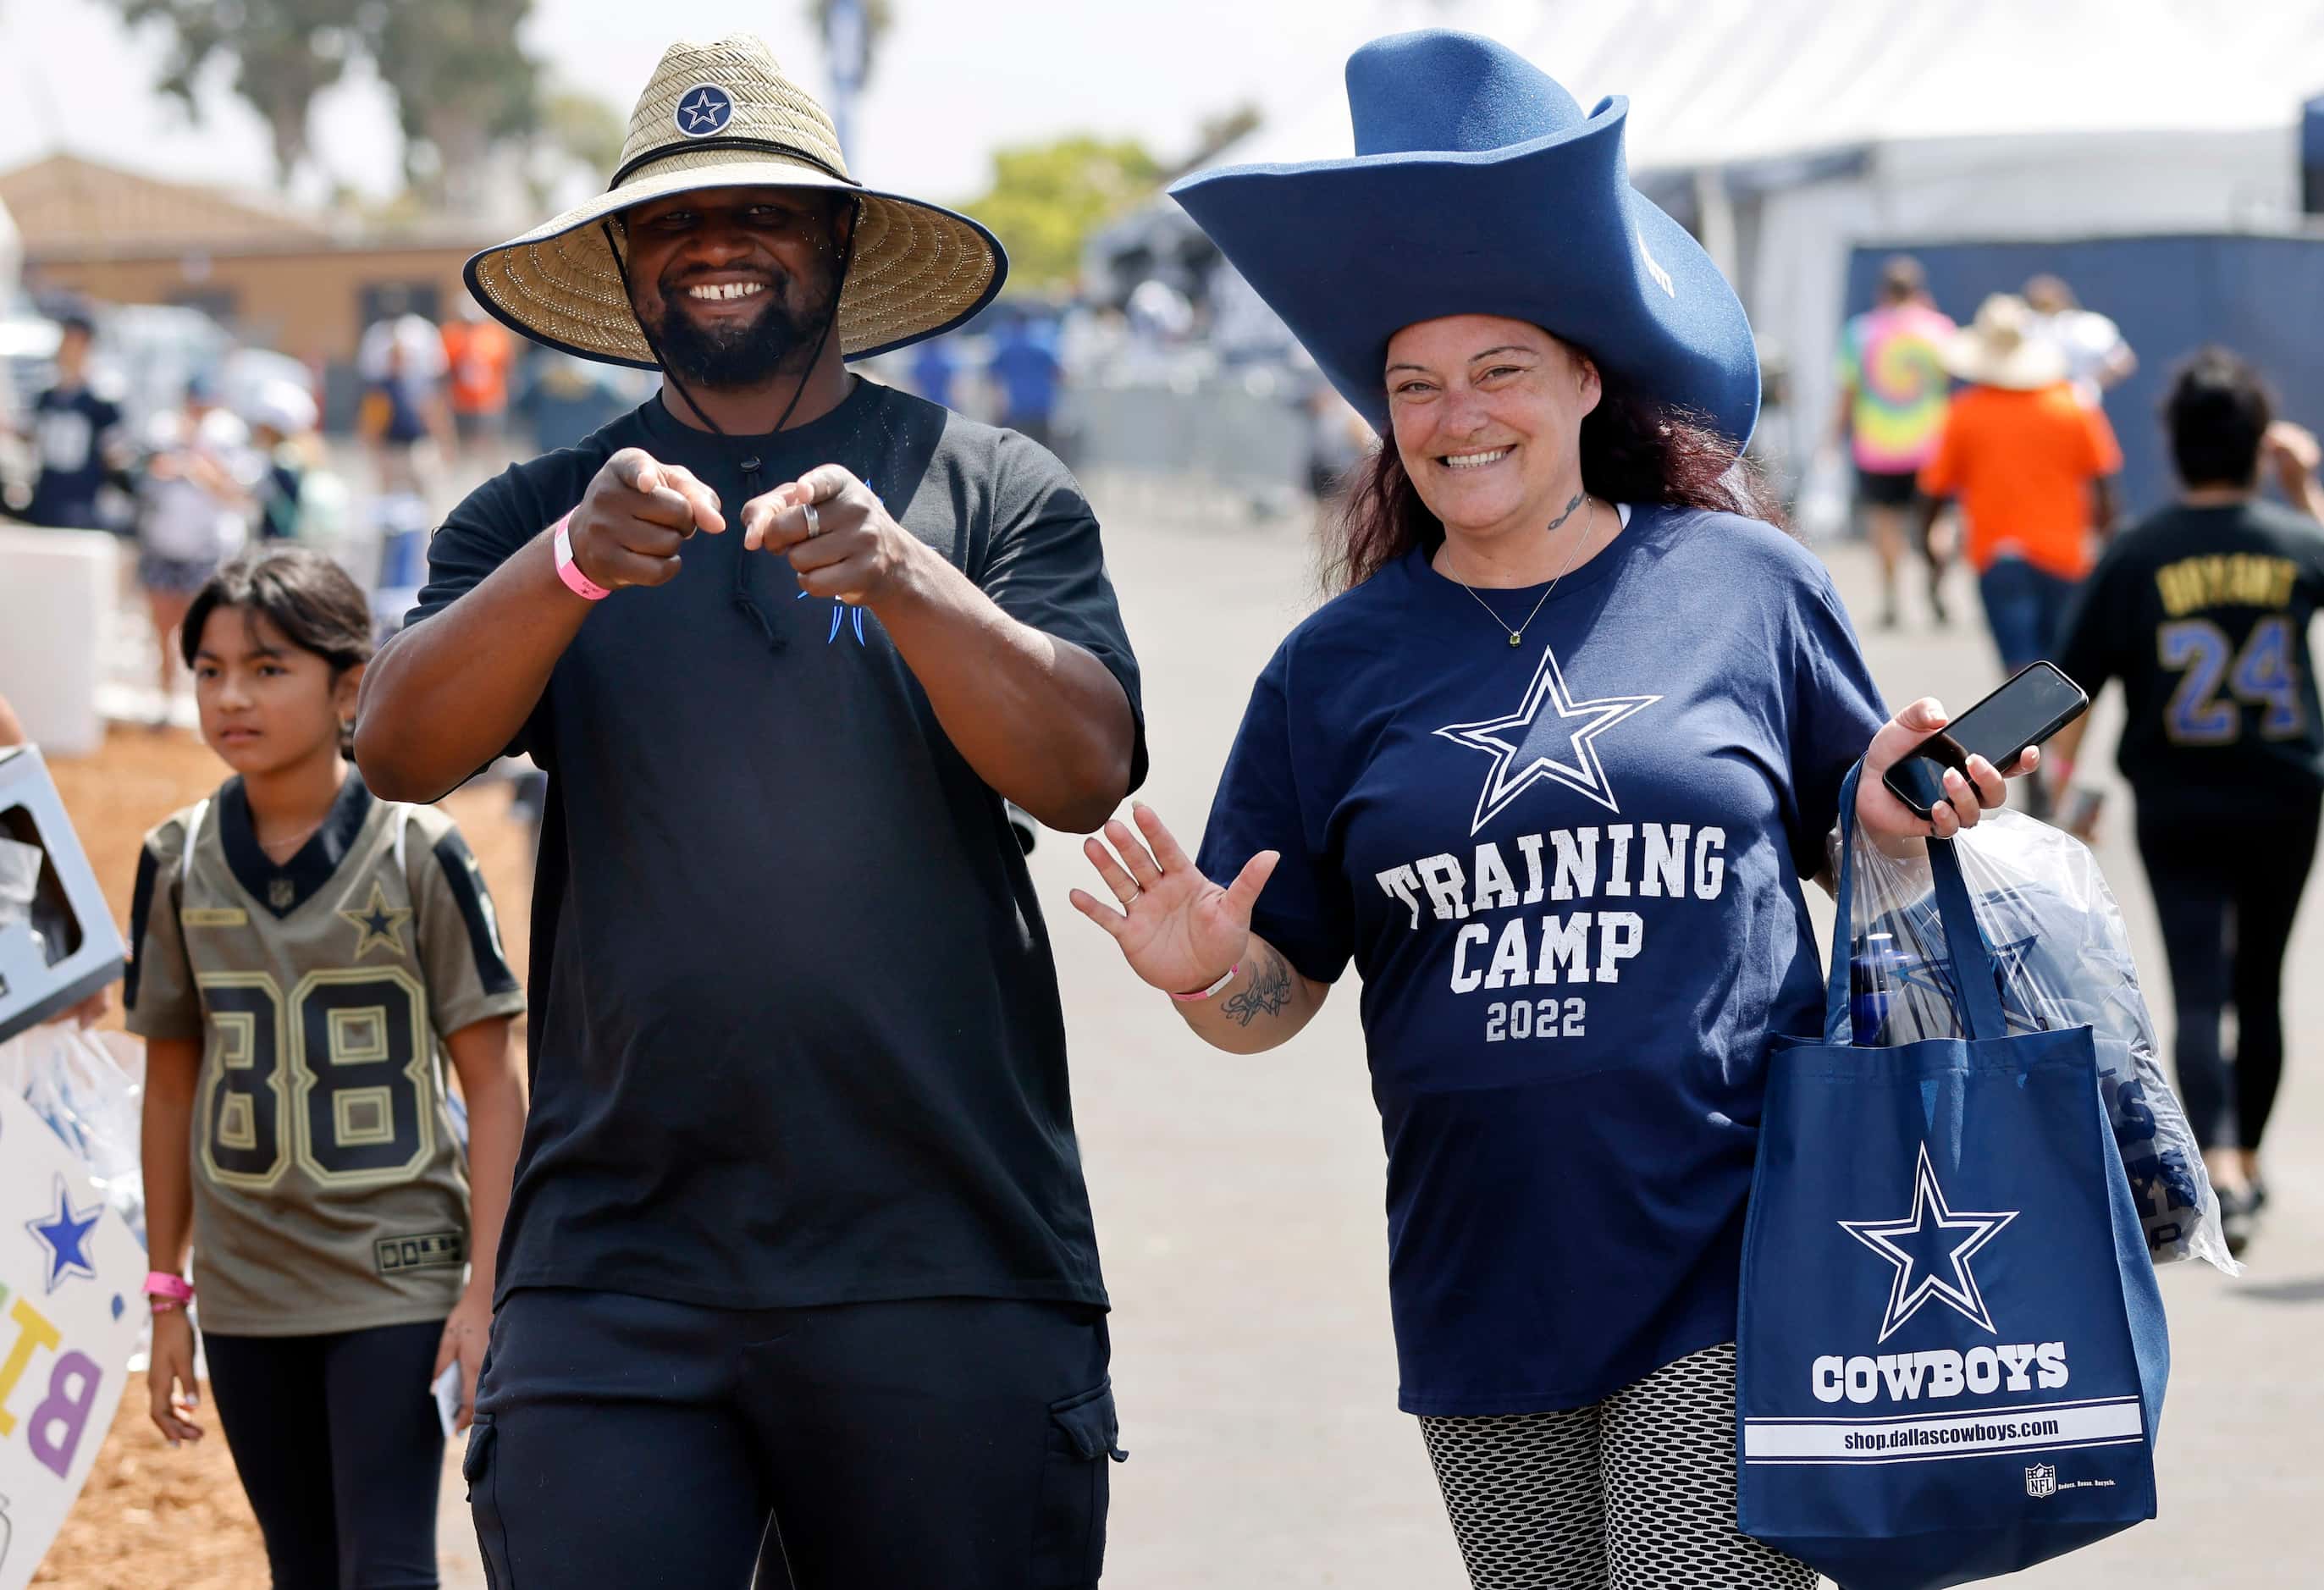 Dallas Cowboys fans Tyshawn Hester of Seaside Heights, New Jersey and his fiancé Bobbie...